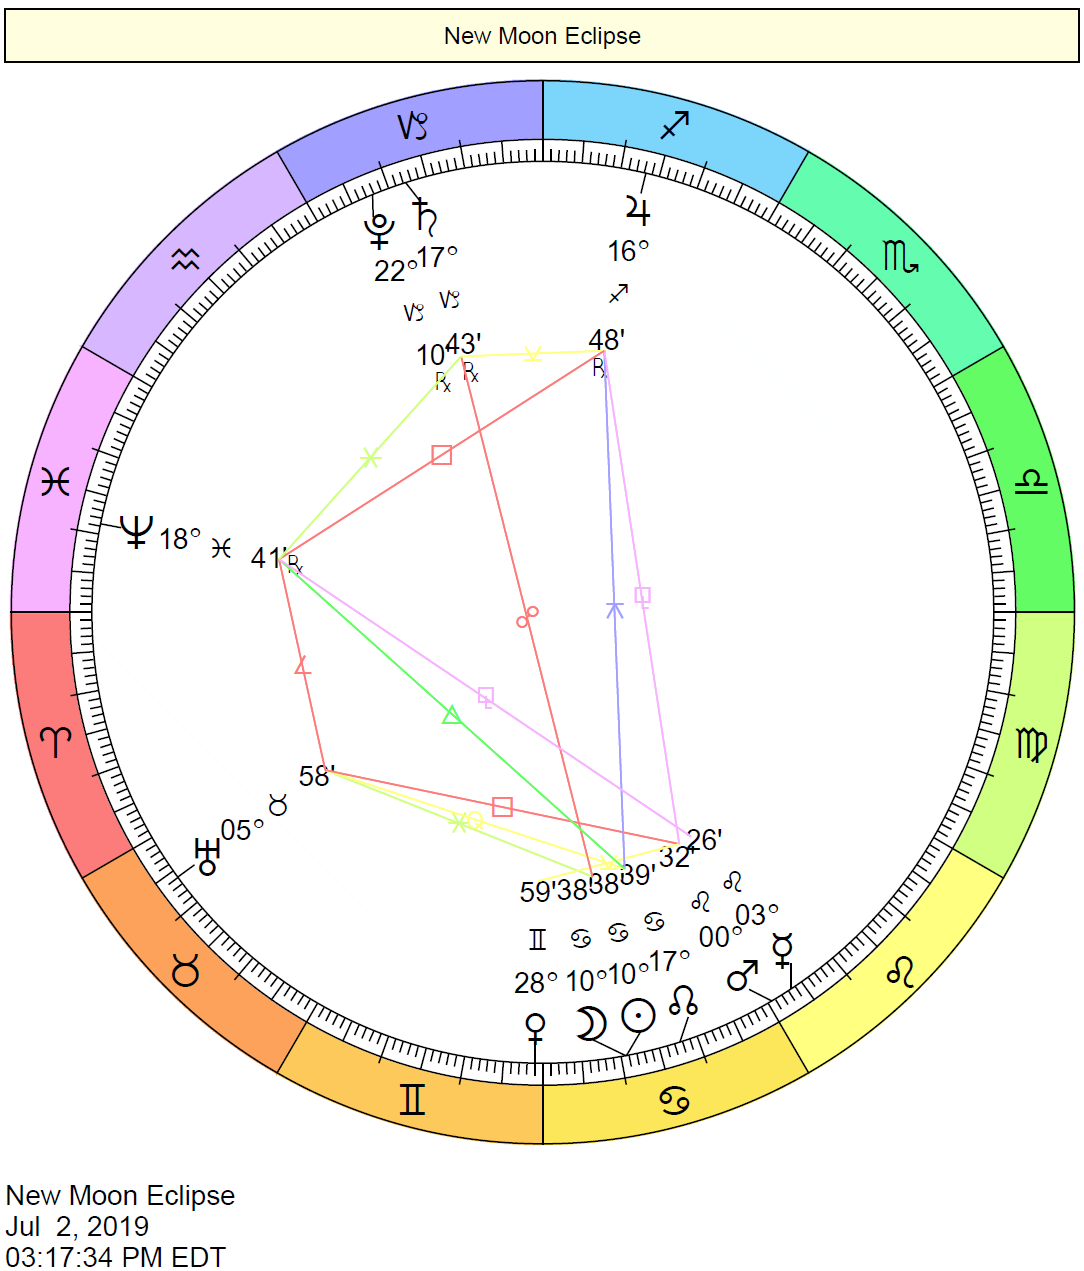 New Moon/Solar Eclipse chart wheel depicts the Sun and Moon in alignment in the sign of Cancer